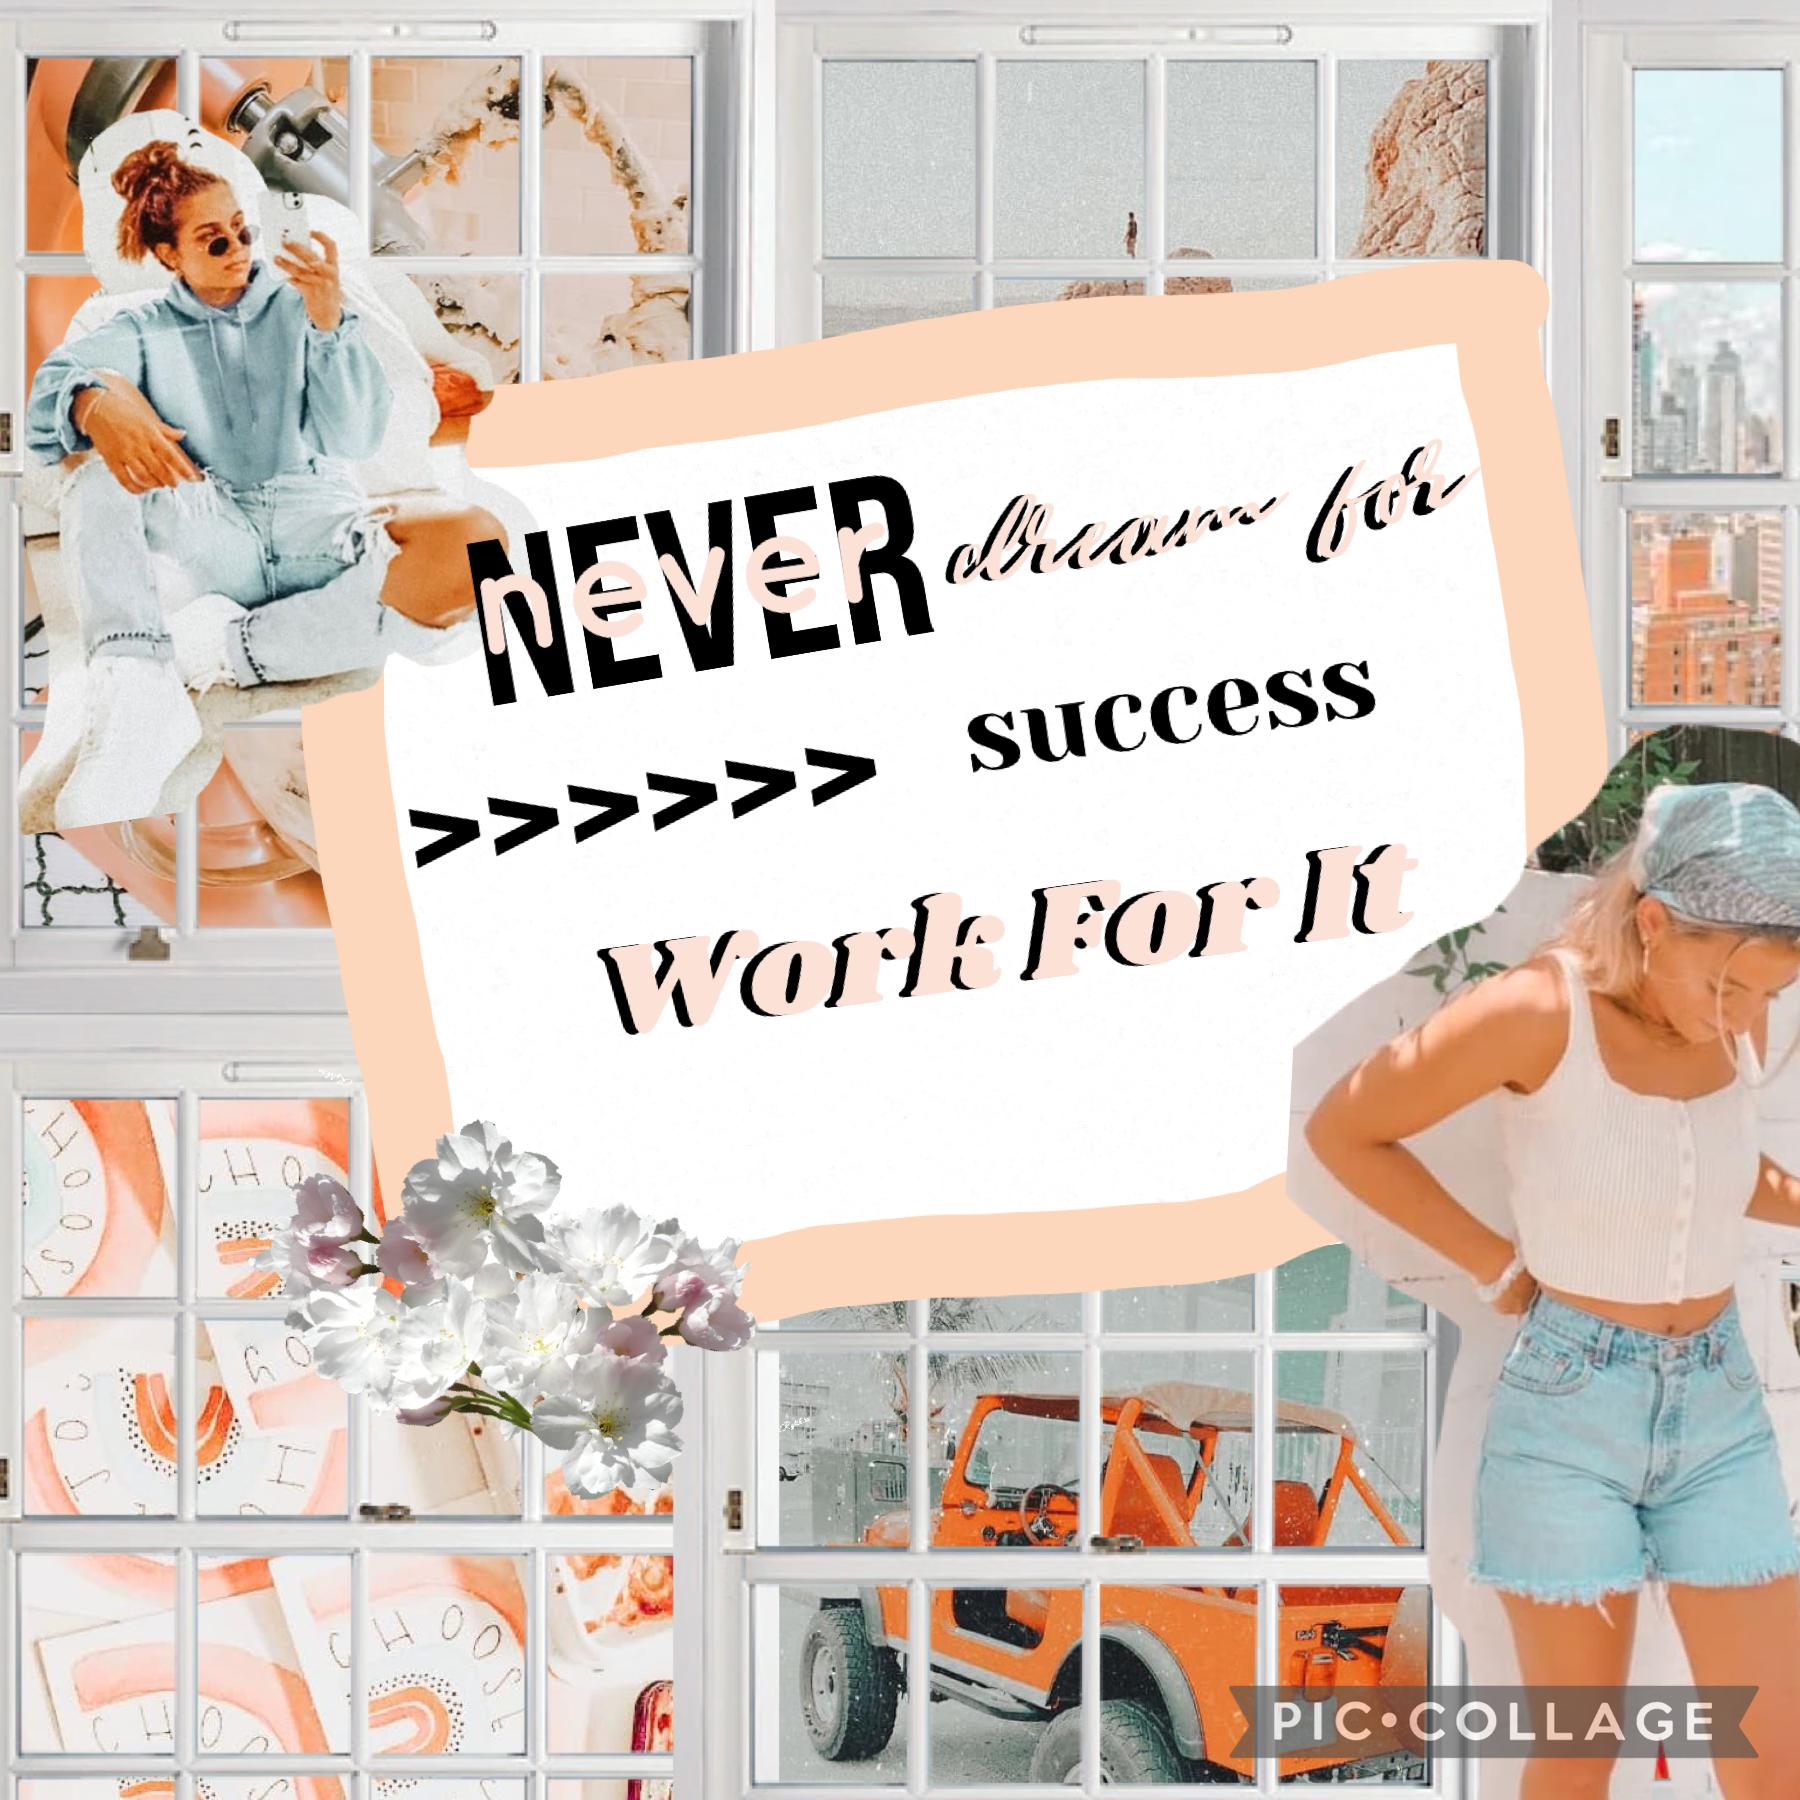 💐 24 March 2021 💐
Tbh I’m loving peachy maybe I might do more peachy collages and Sunny’s if you have aesthetic people that are the same theme please remix them. Ily Sunny’s and thx for the encouragement.